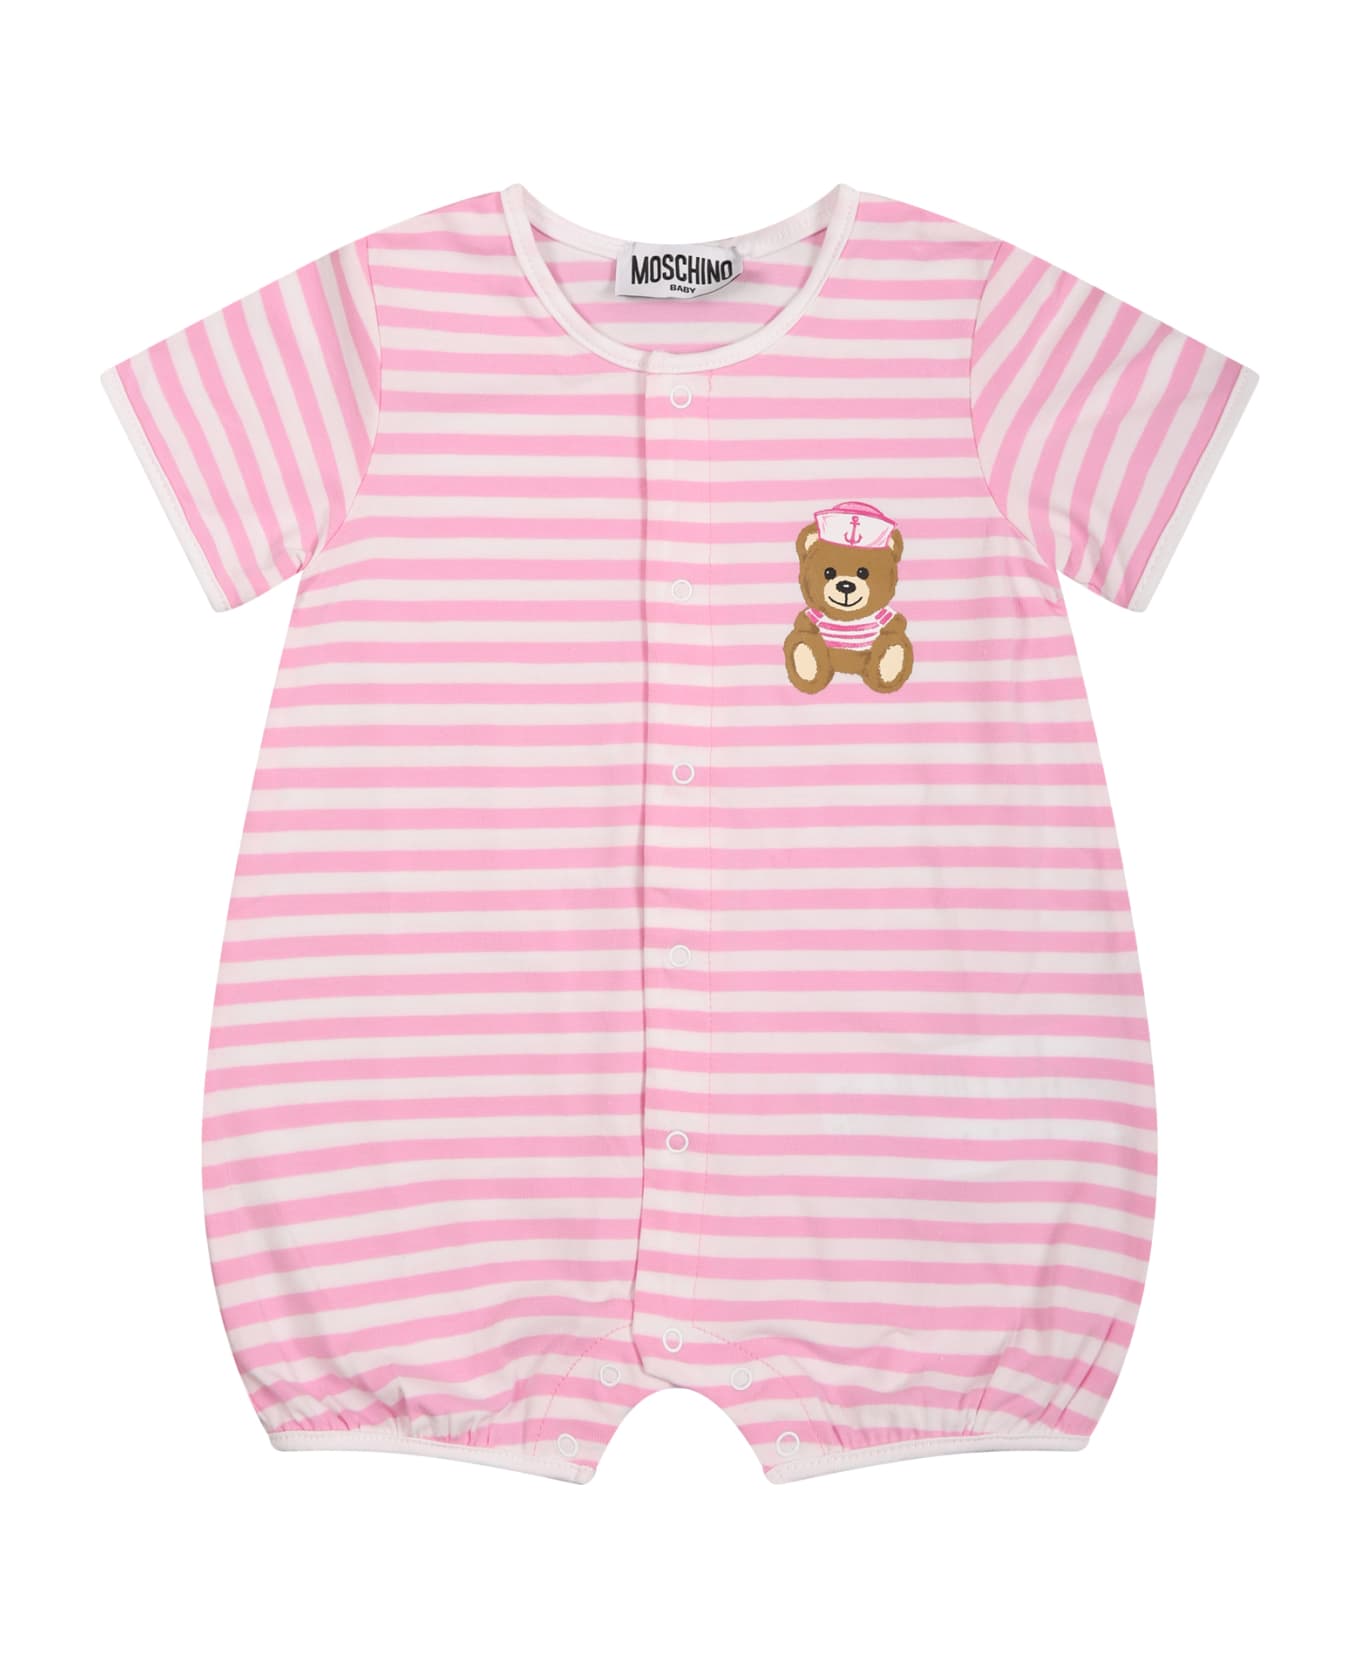 Moschino Multicolor Romper For Baby Girl With Teddy Bear And Logo - Pink